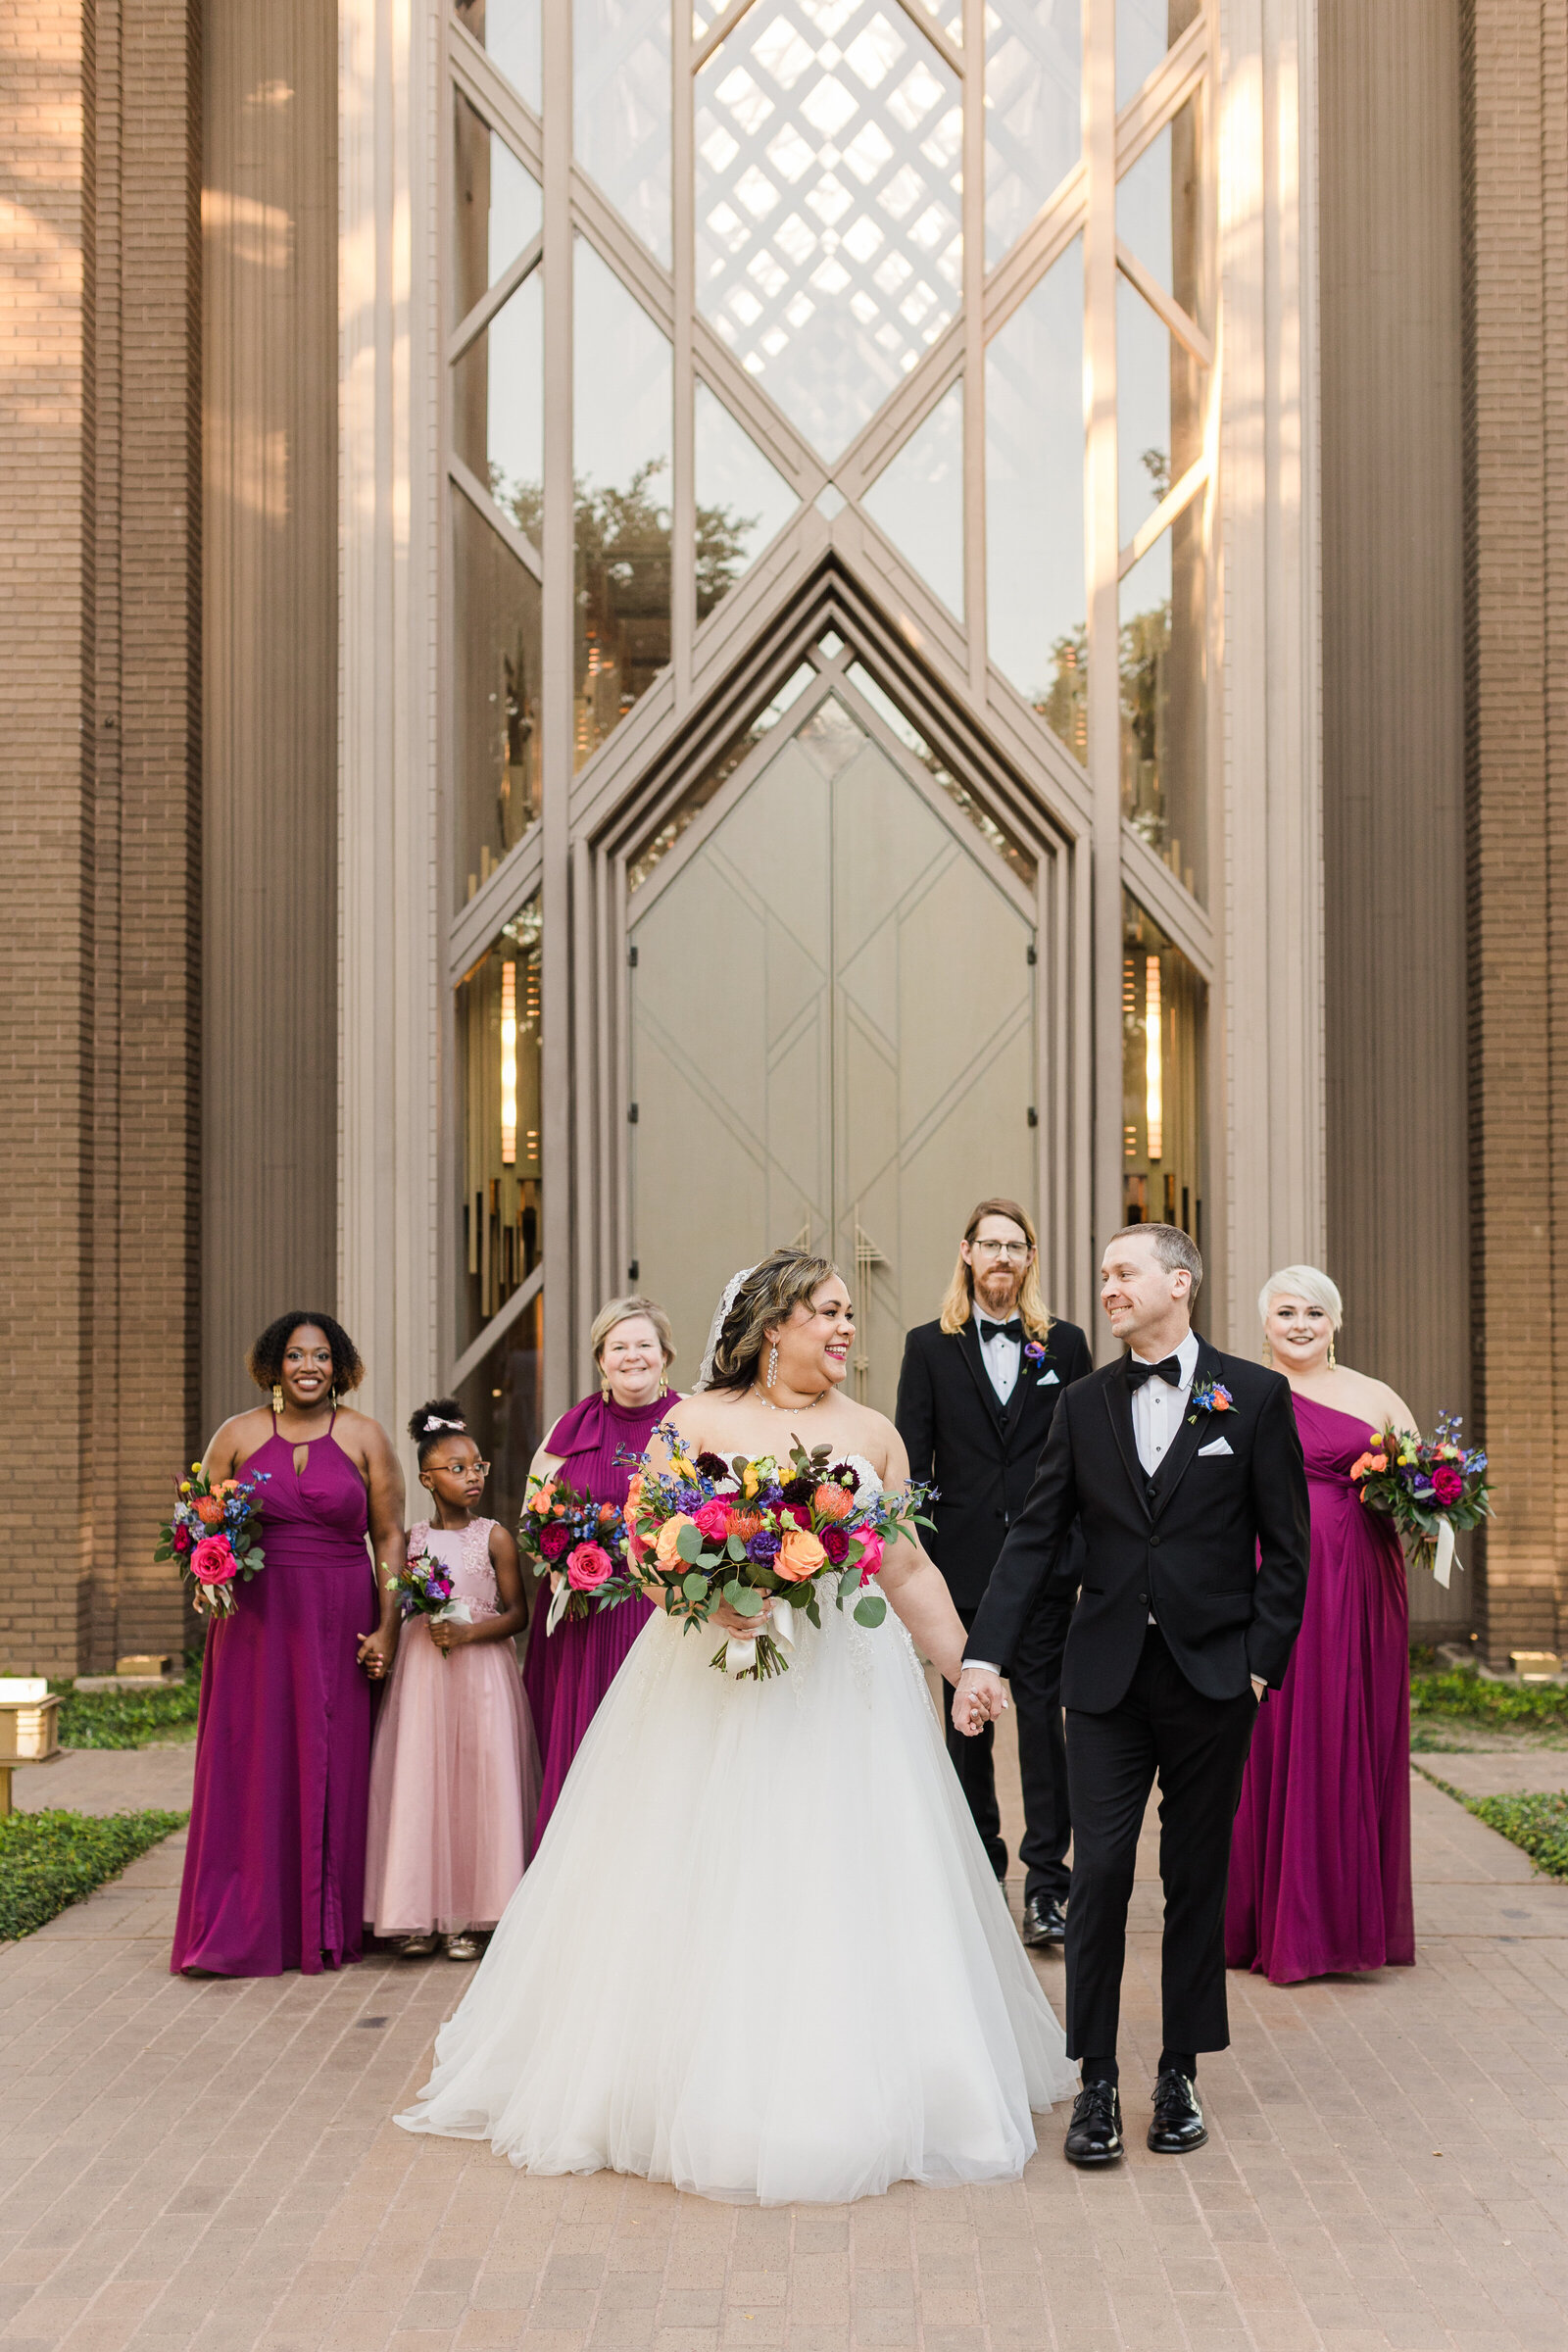 A bride and groom smiling and looking at each other alongside their wedding party in front of the Marty Leonard Chapel in Fort Worth, Texas. The bride is on the left and is wearing a long white dress and holding a bouquet. The groom is on the right and is wearing a black tuxedo with a boutonniere. Their wedding party is wearing either purple dresses or a black tuxedo.